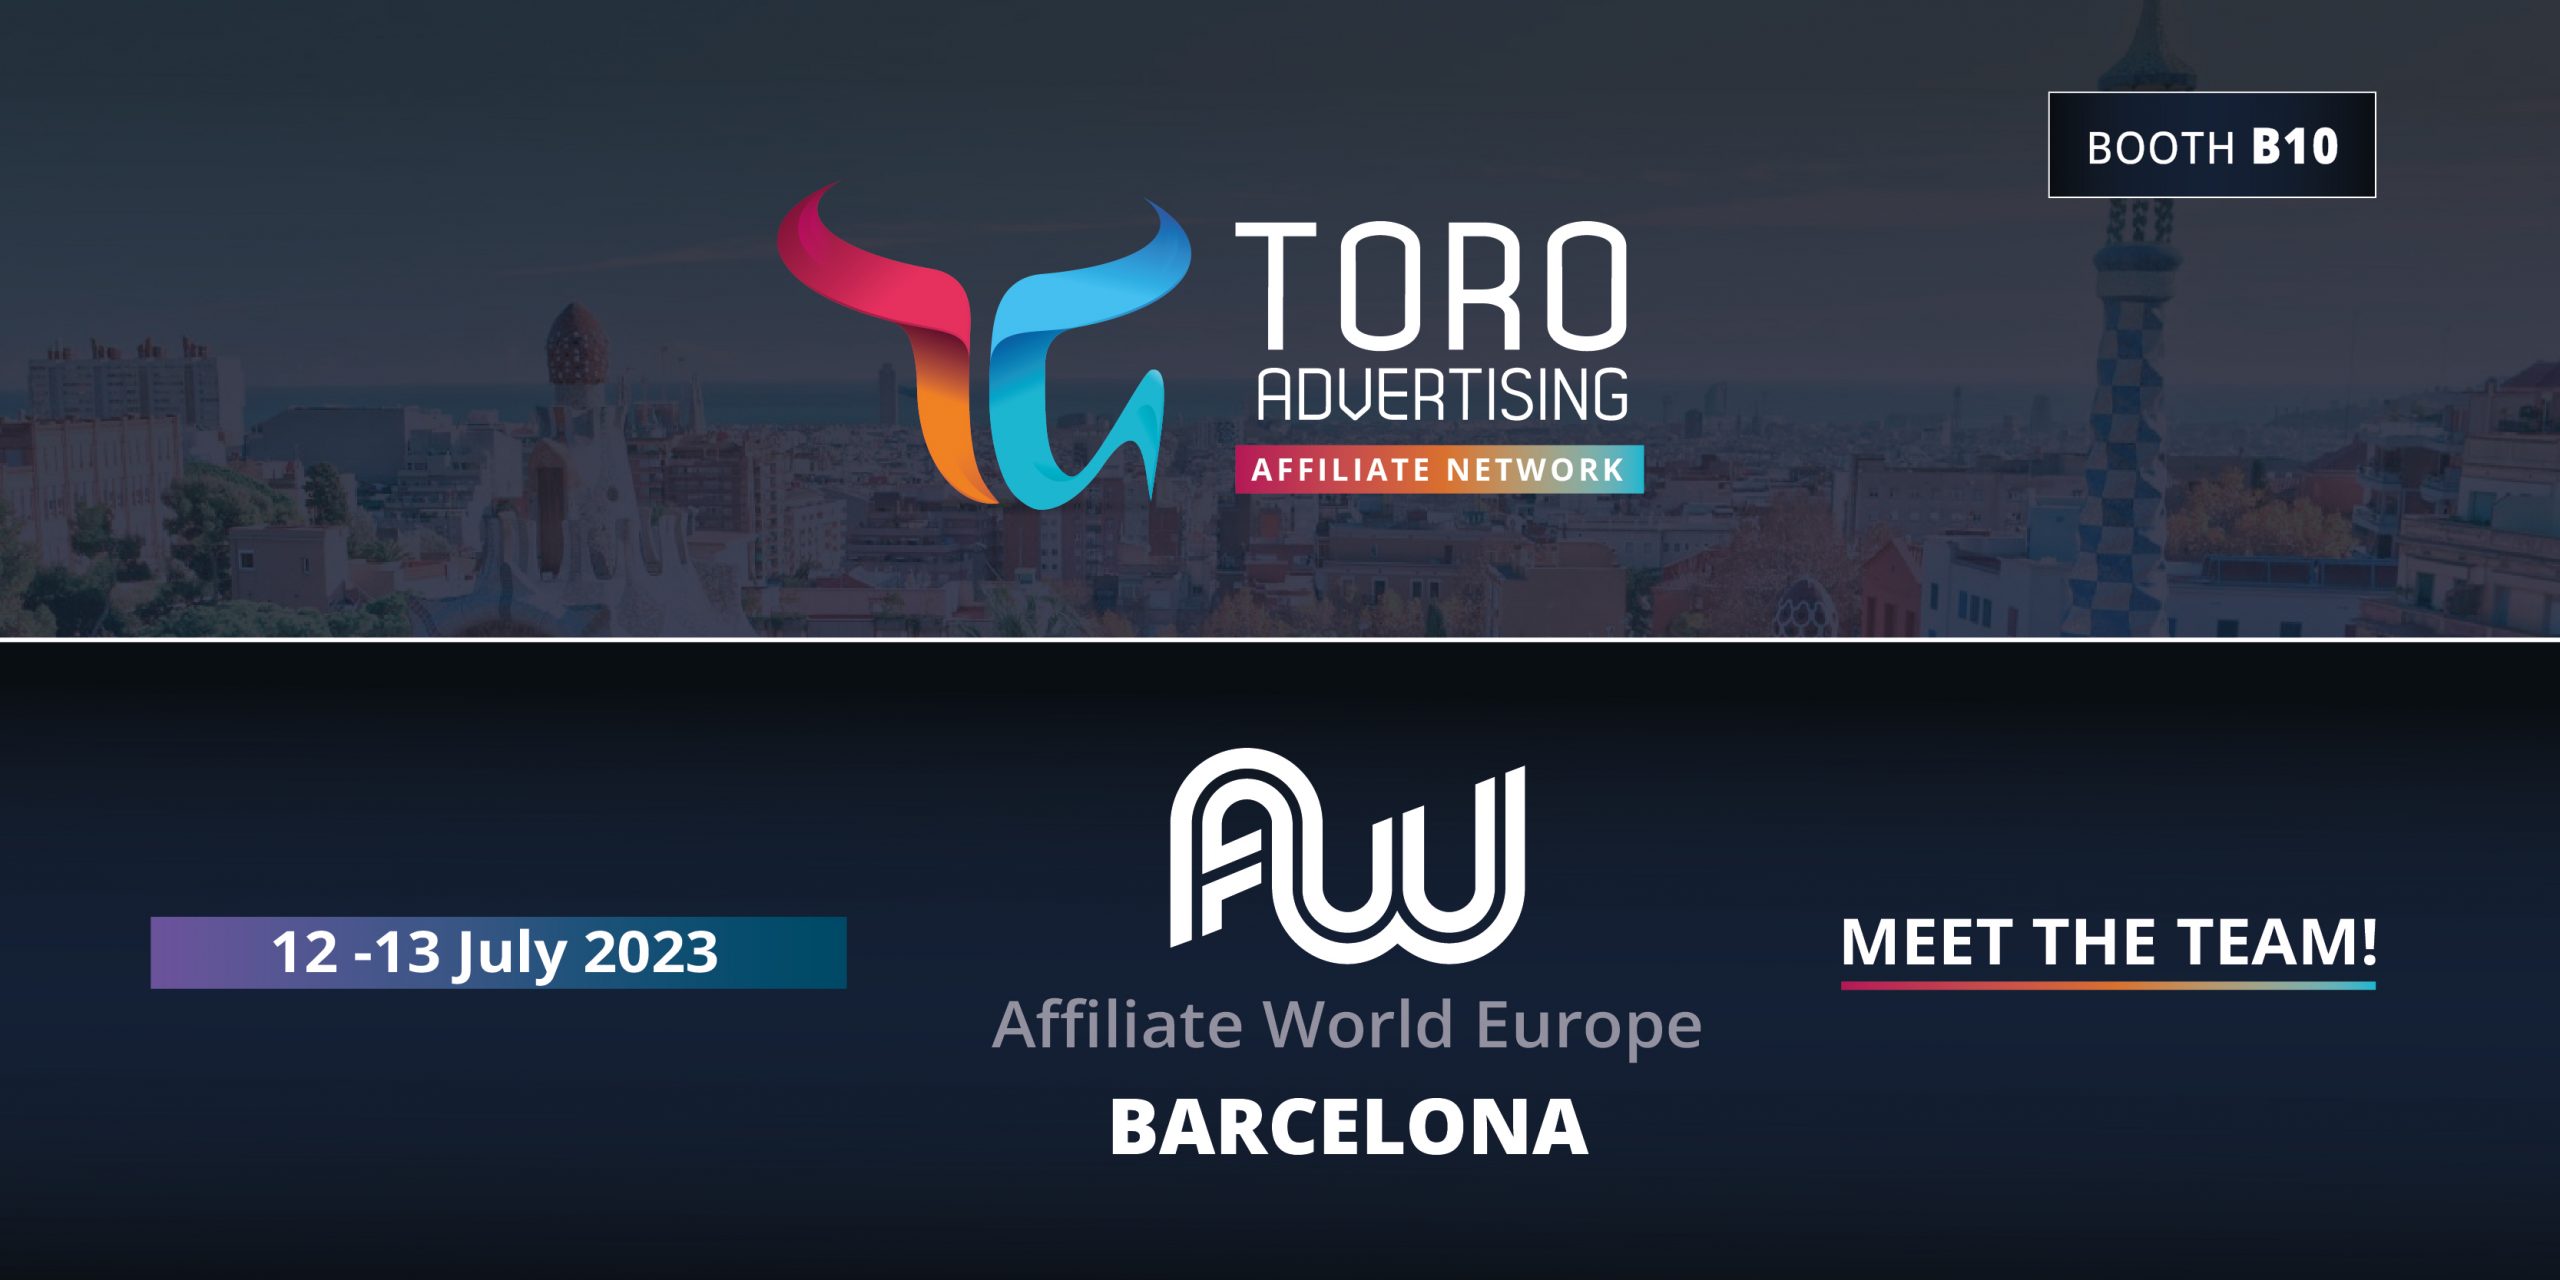 TORO Advertising is attending the world’s #1 performance marketing conference #AW Europe, Barcelona on 12-13 July 2023. Stop by booth B10 and say hello to the team!